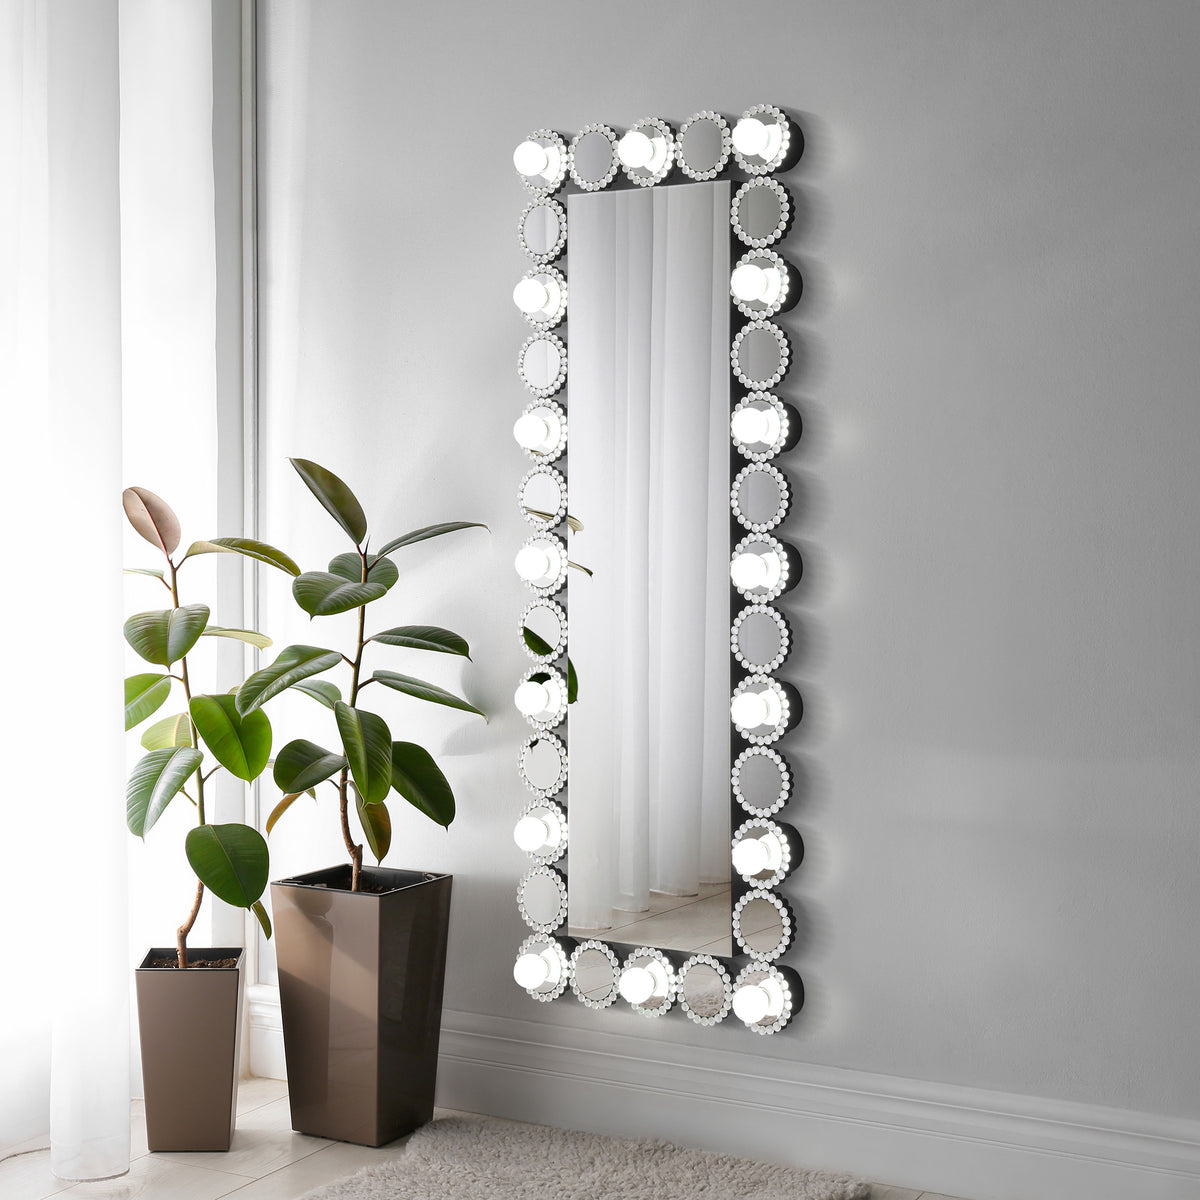 Aghes Rectangular Wall Mirror with LED Lighting Mirror Aghes Rectangular Wall Mirror with LED Lighting Mirror 